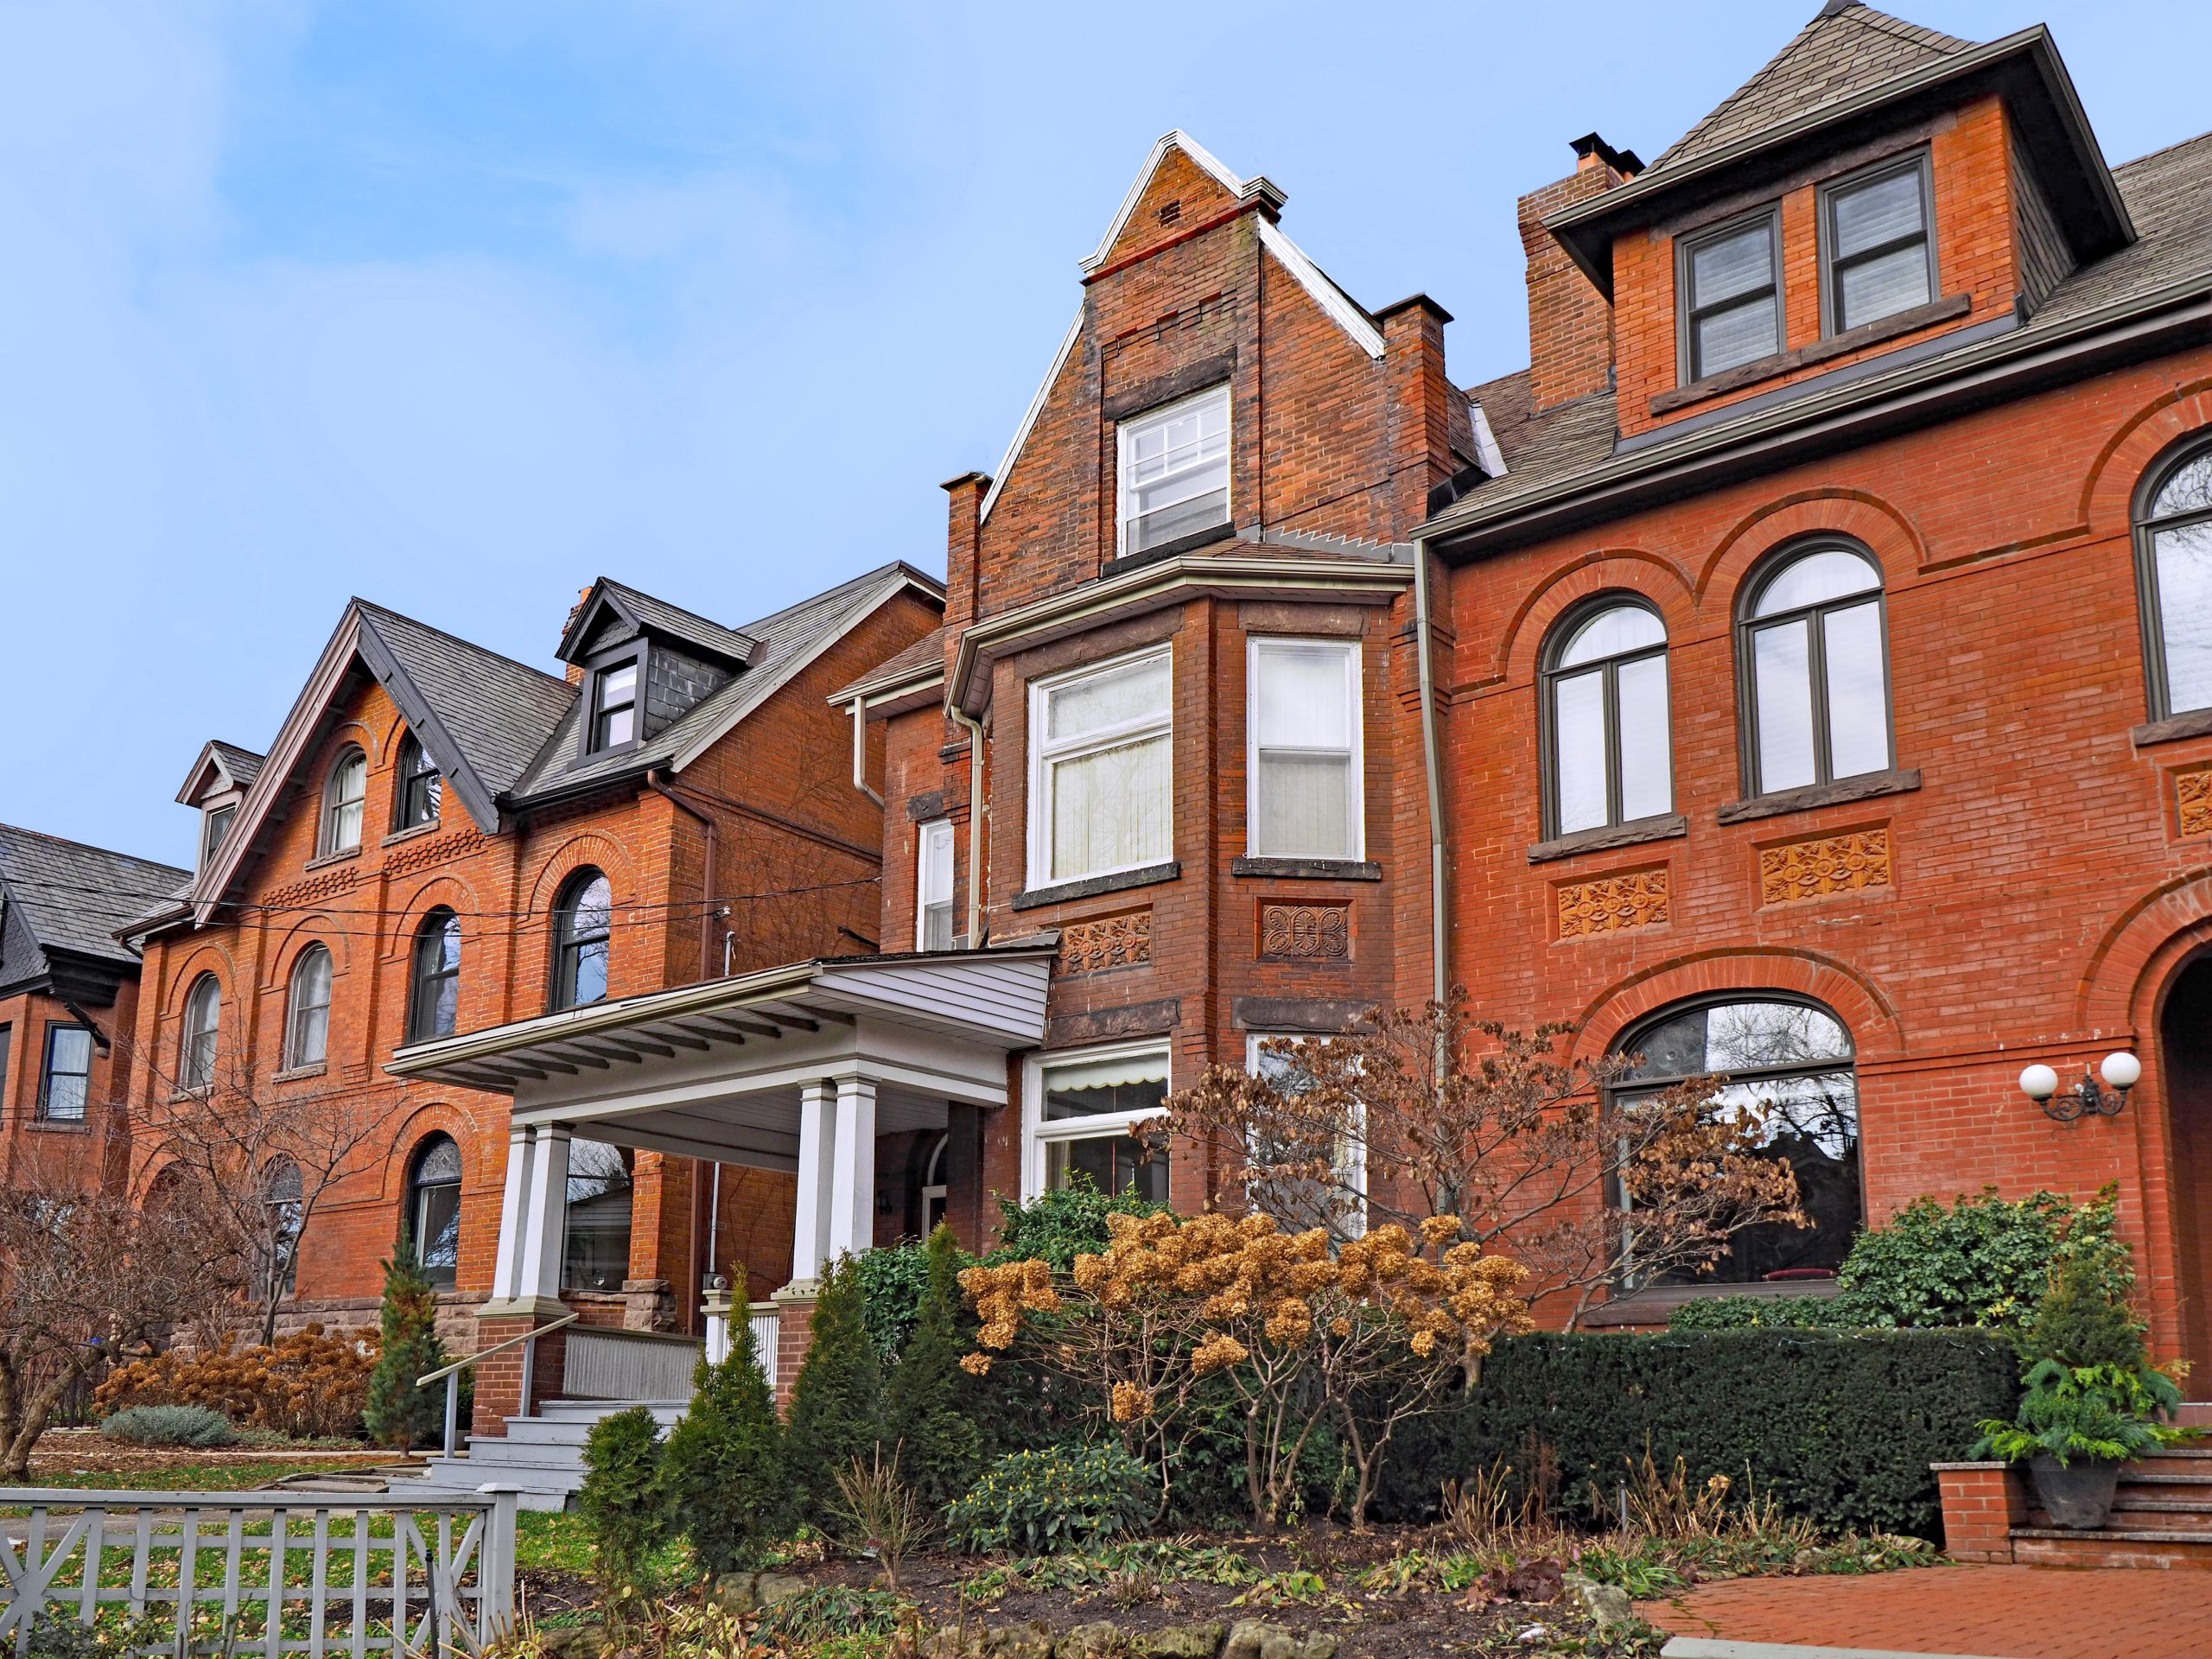 large brick Victorian houses with gables and dormer windows